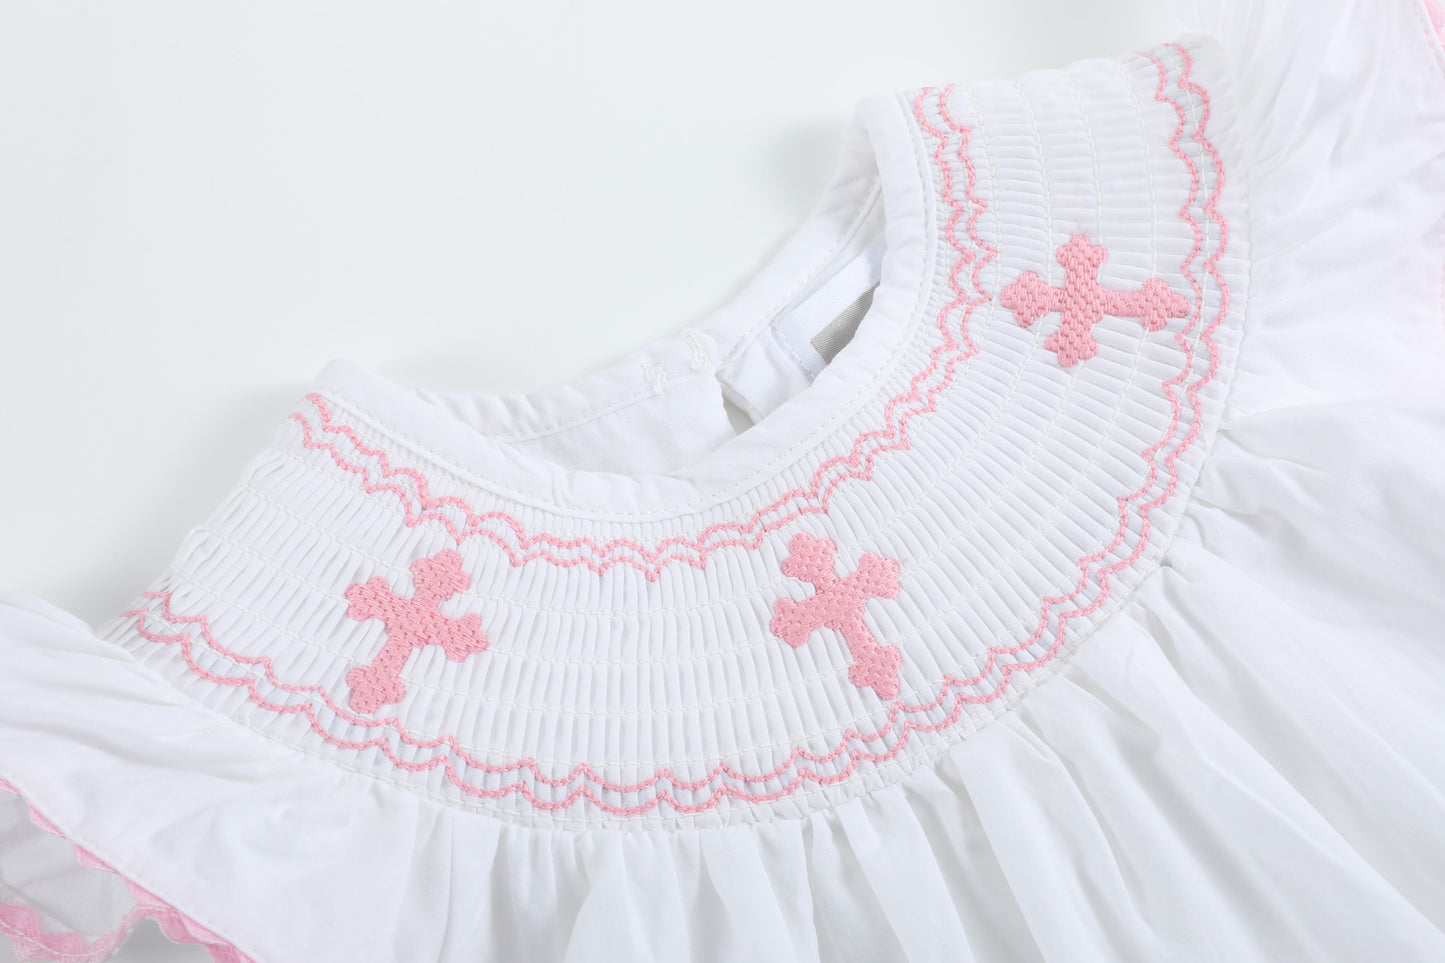 White and Pink Cross Smocked Dress and Bloomer Set